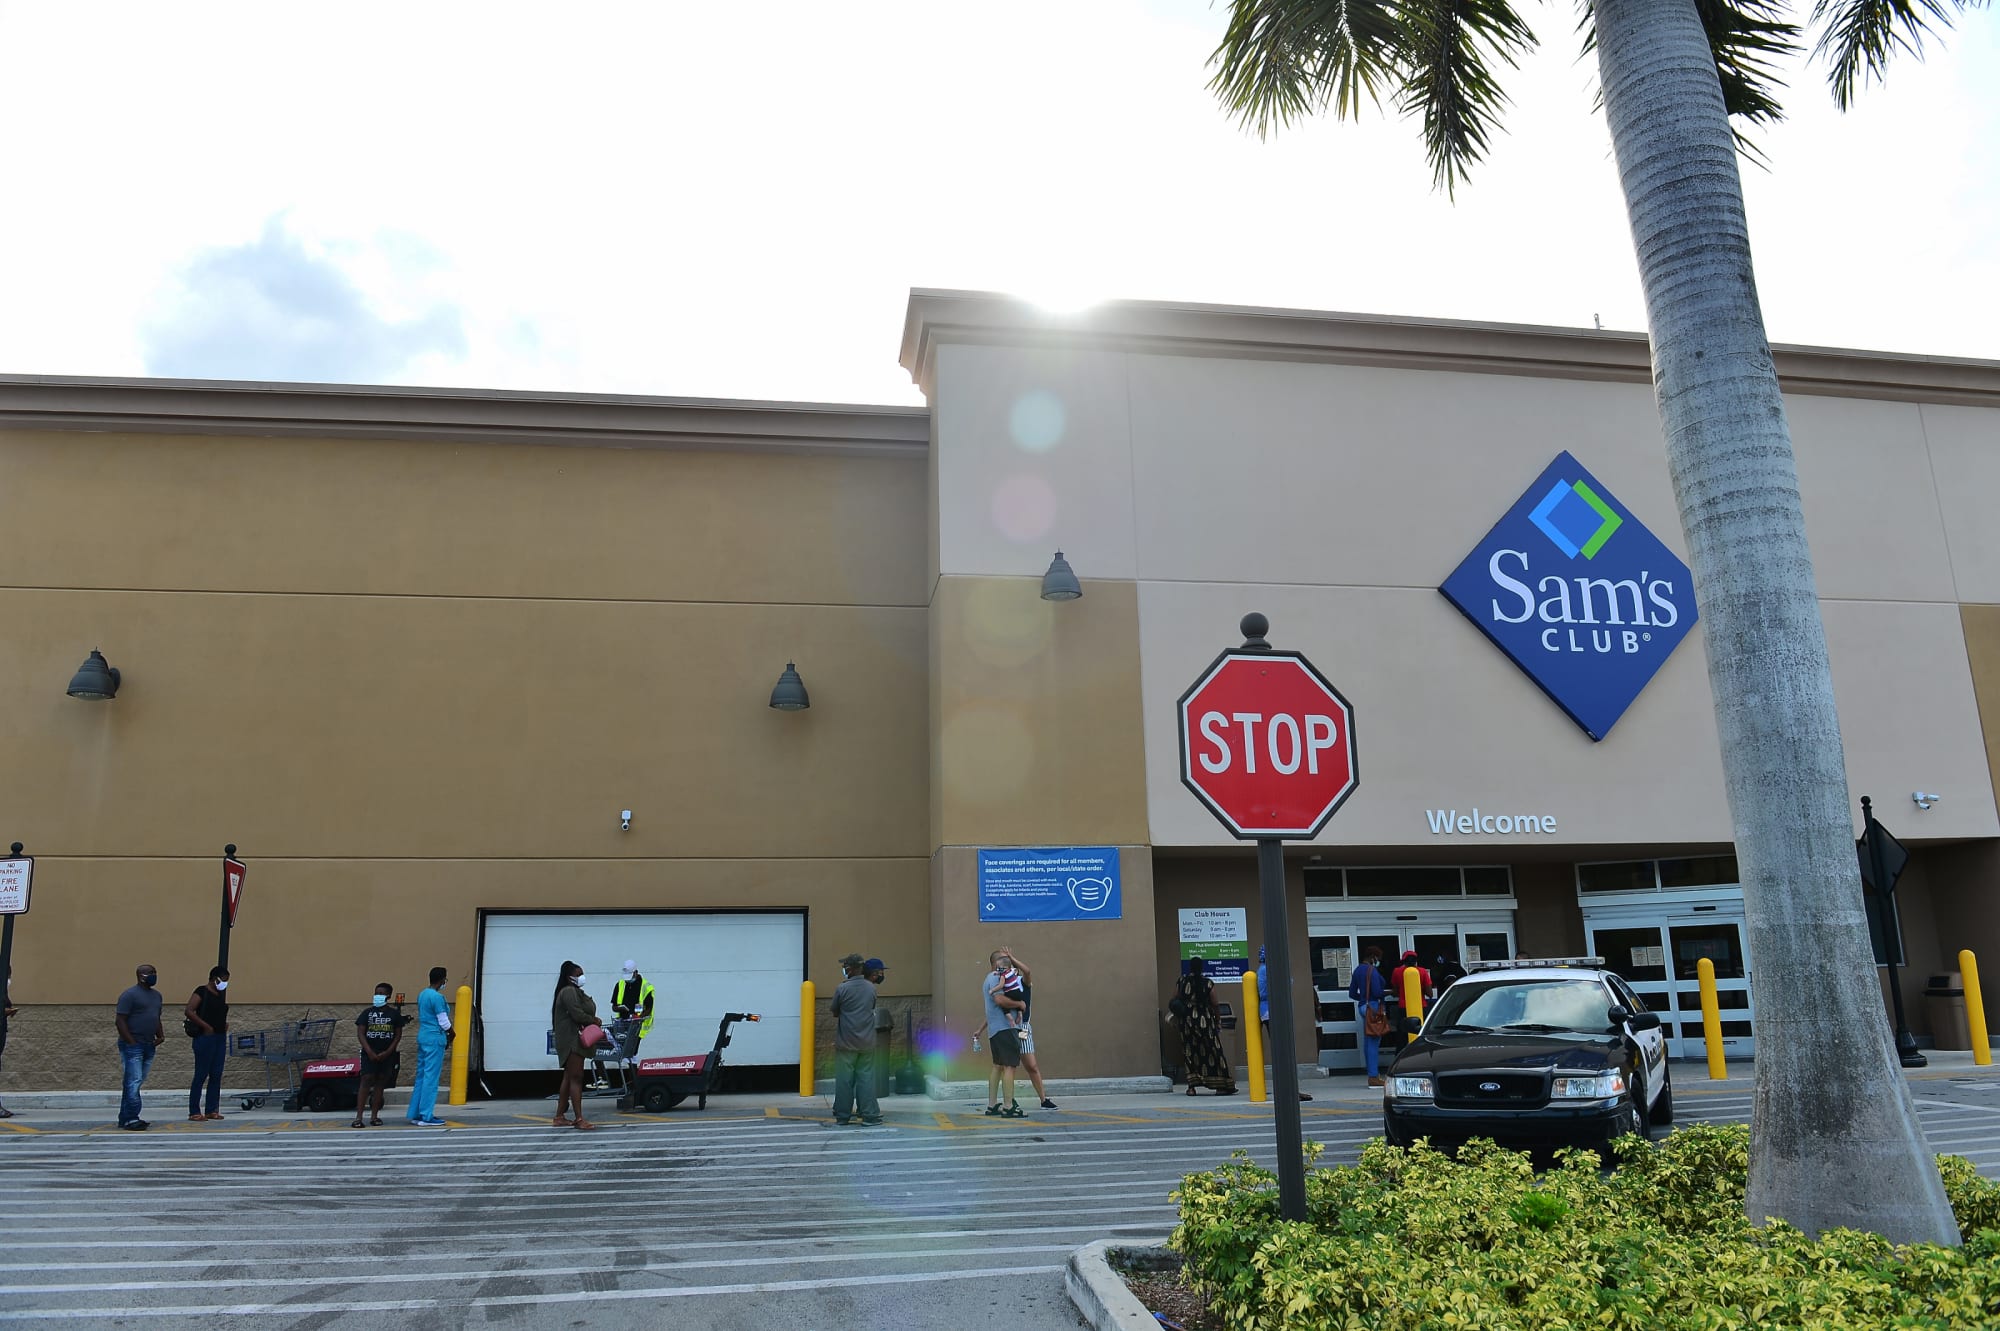 Is Sam’s Club open on Easter 2021?